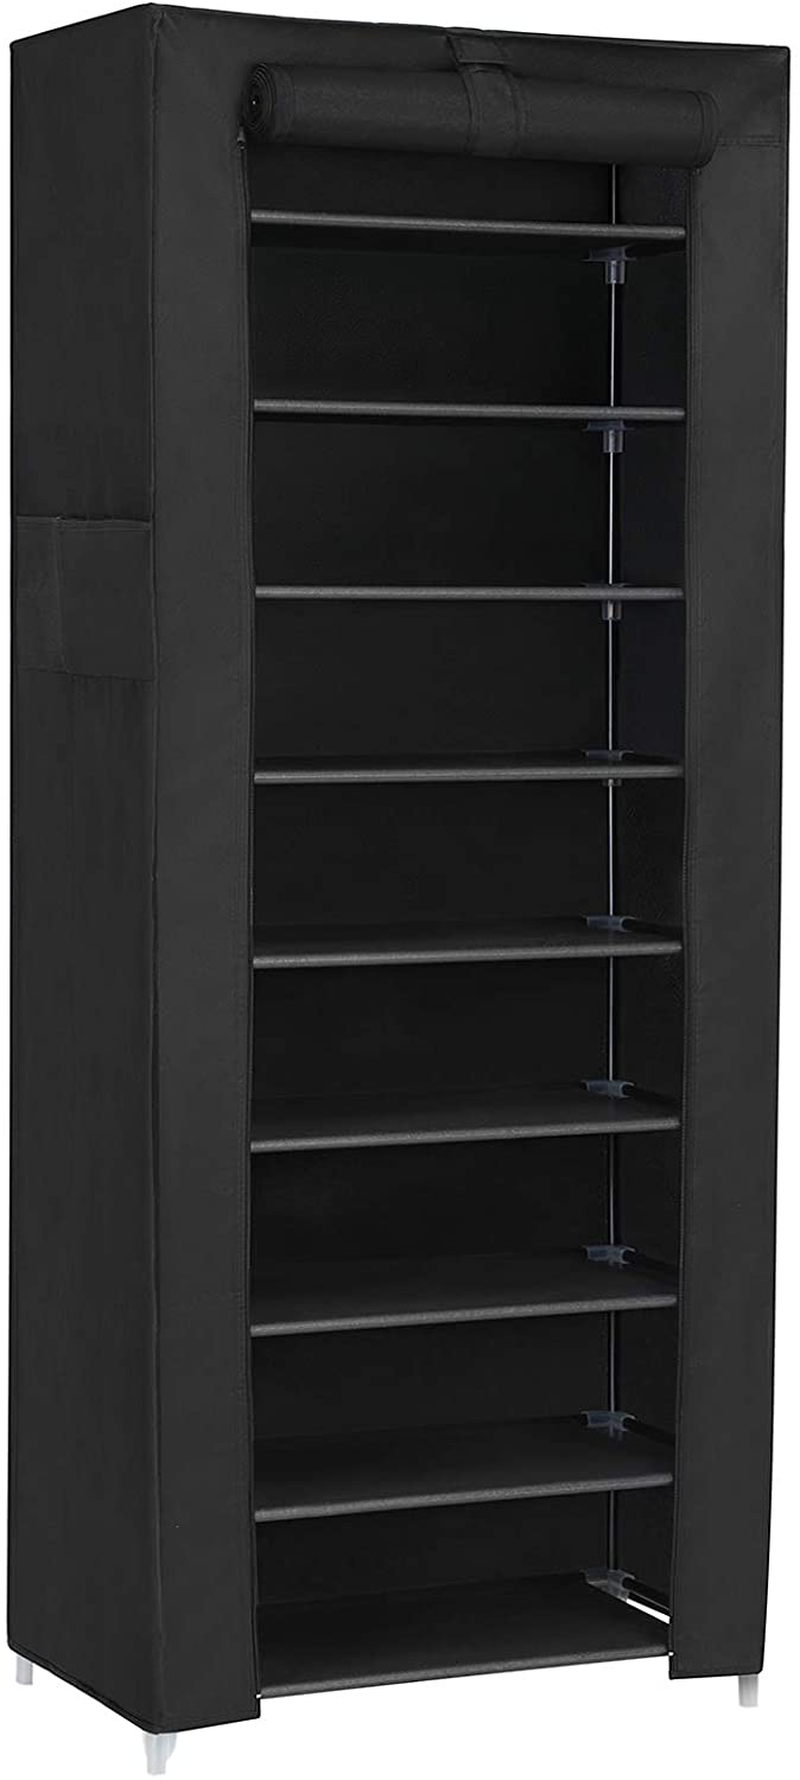 SONGMICS 10-Tier Shoe Rack, 34.6 X 11 X 63 Inches, Holds up to 50 Pairs, Storage Organizer with Dustproof Cover Gray